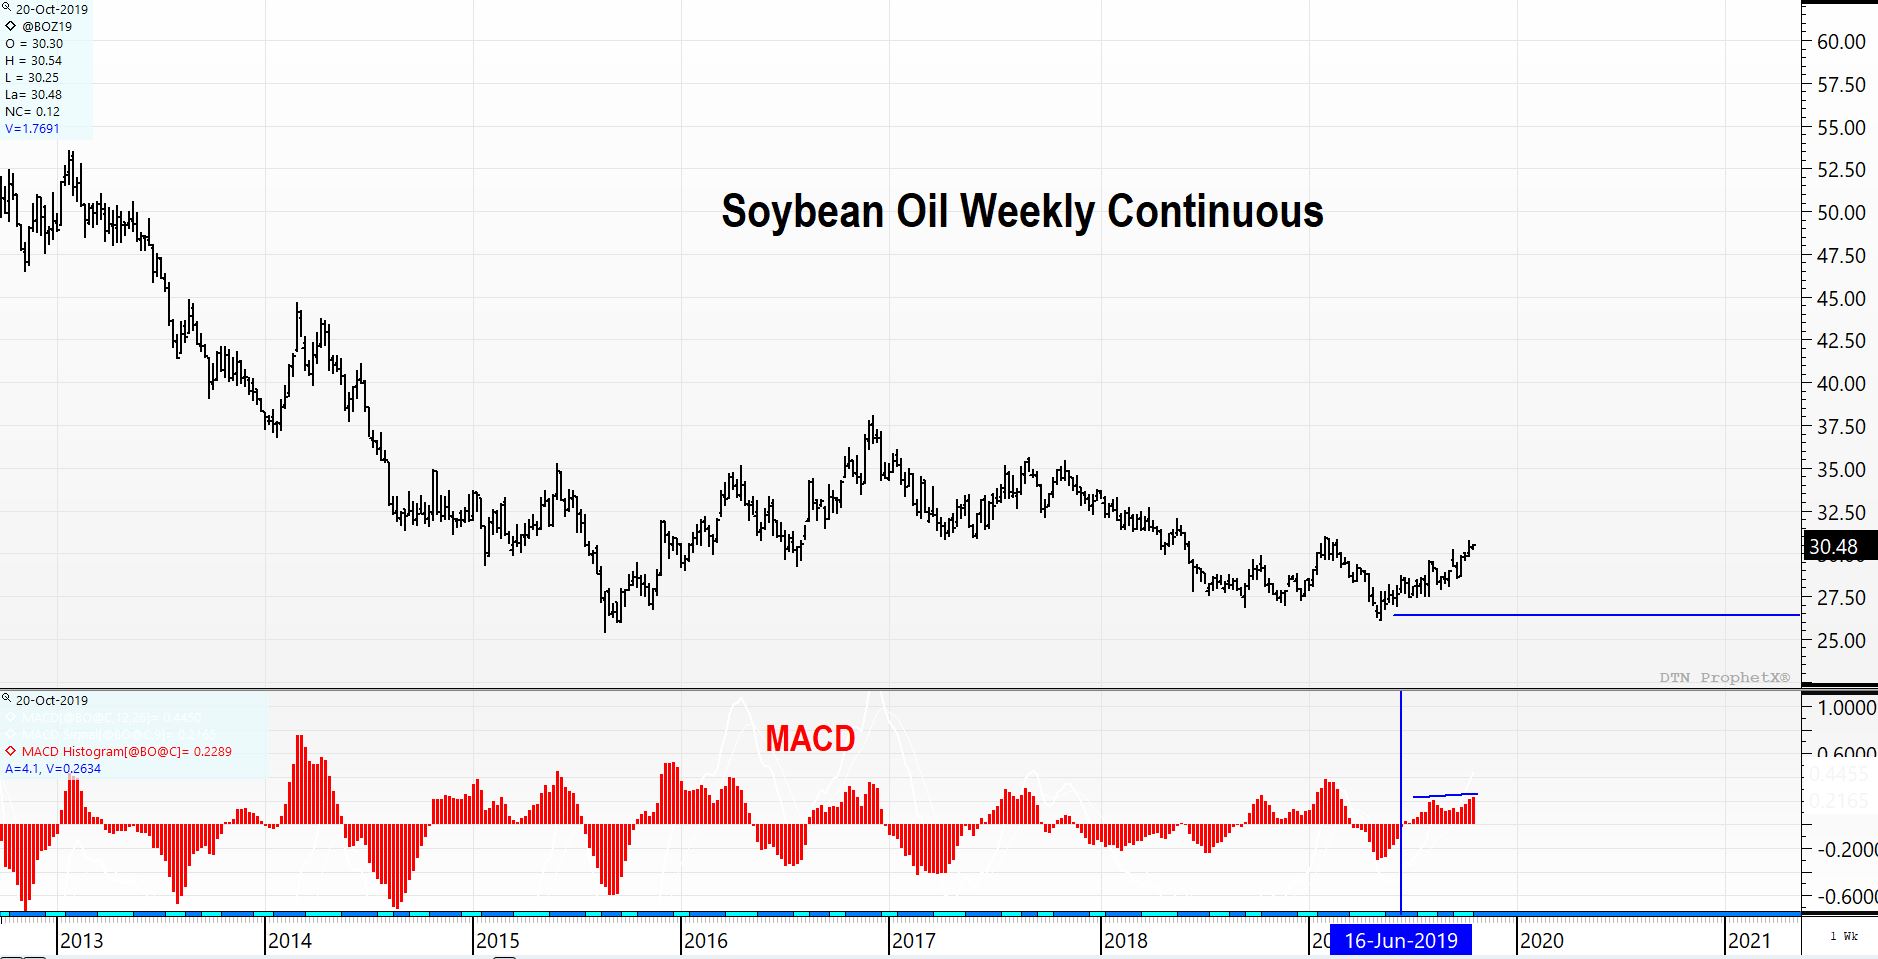 Soybean Oil Weekly Continuous Futures